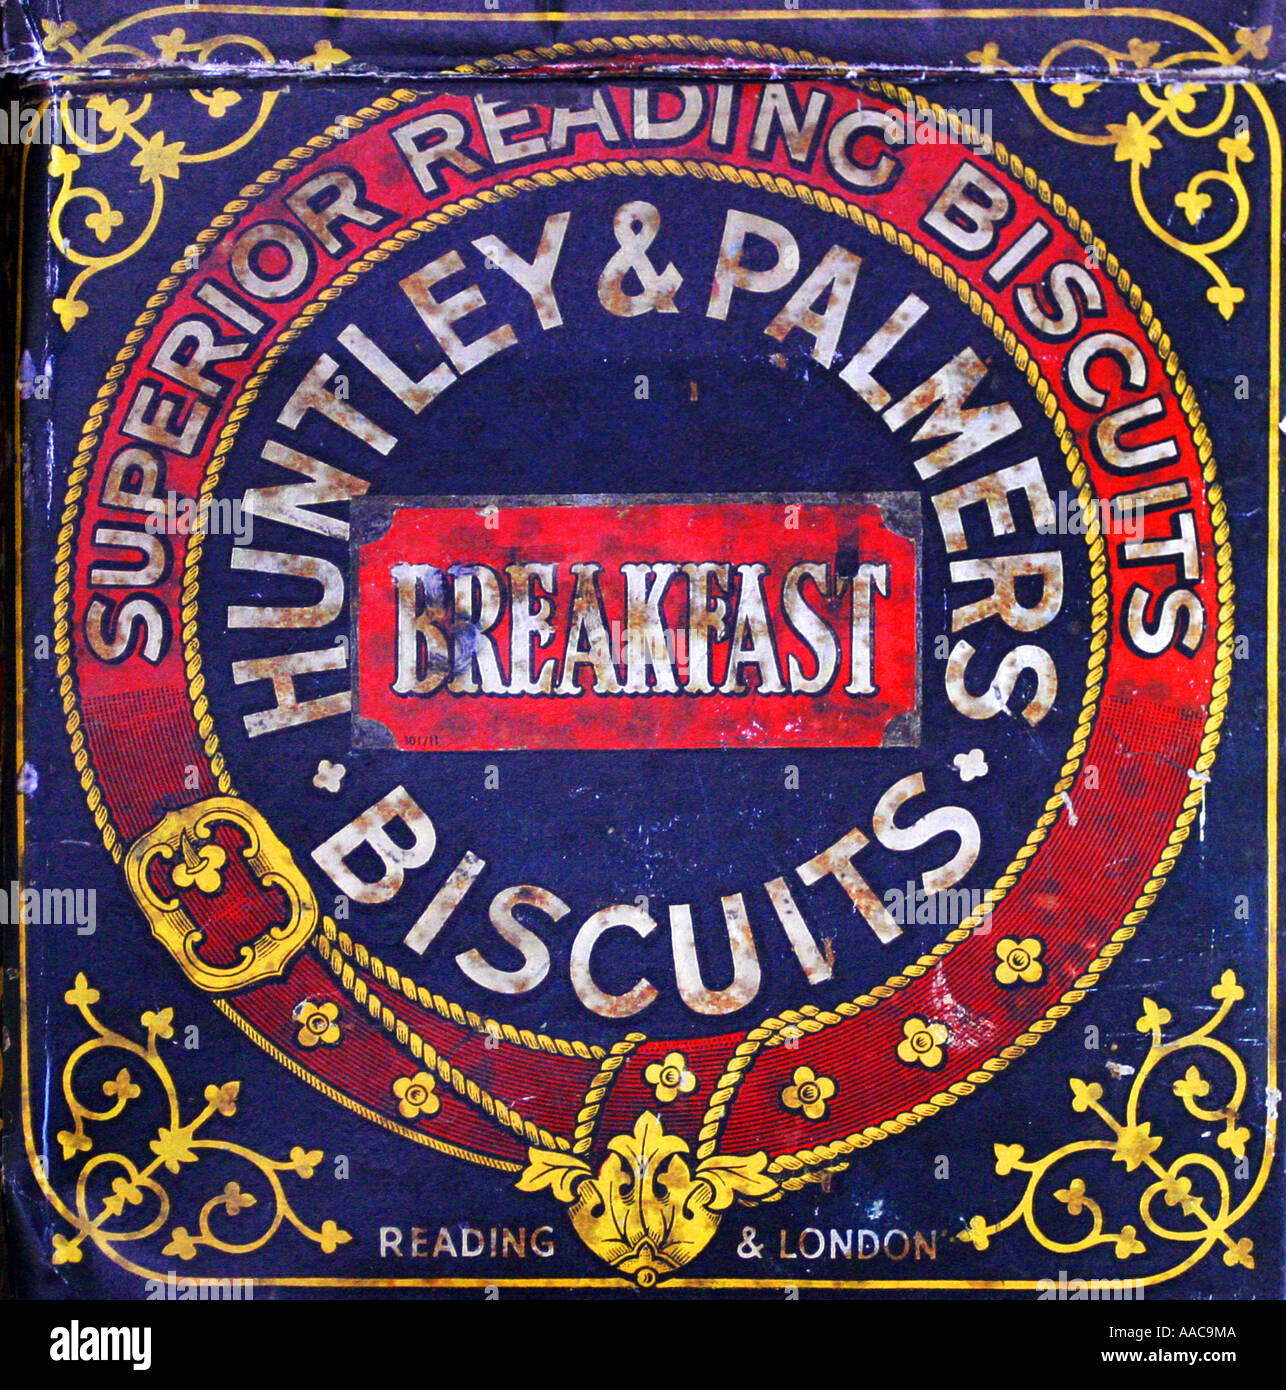 Huntley and Palmers Biscuits Advert Vintage Retro style Metal Sign, 